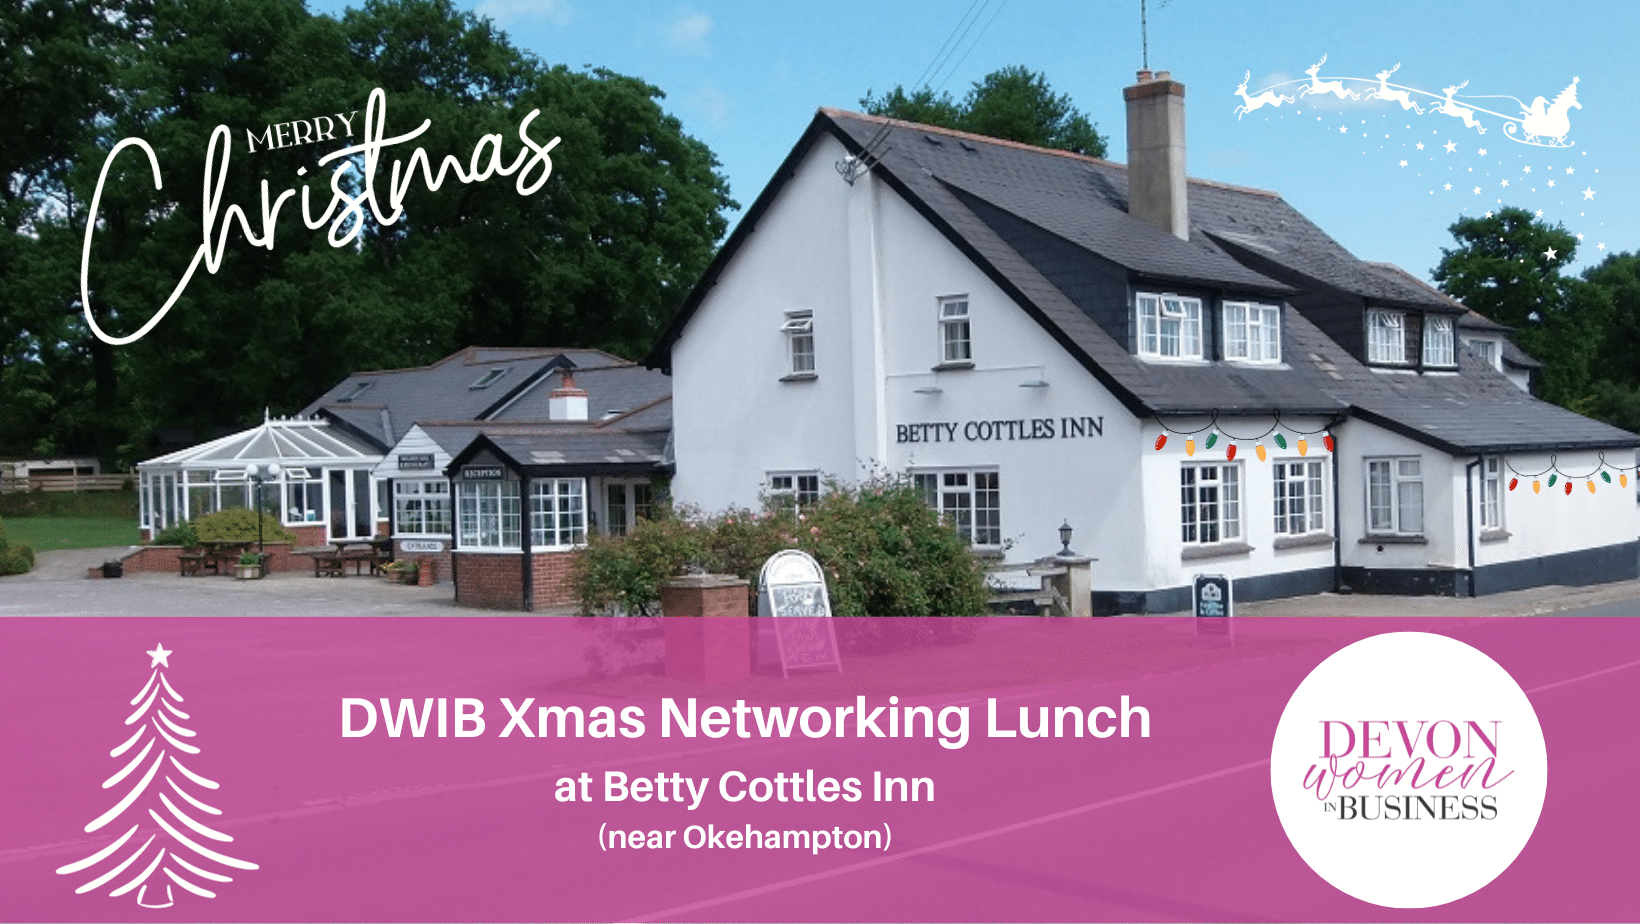 Photo of Betty Cottles Inn. Venue for the DWIB Xmas Networking Lunch.